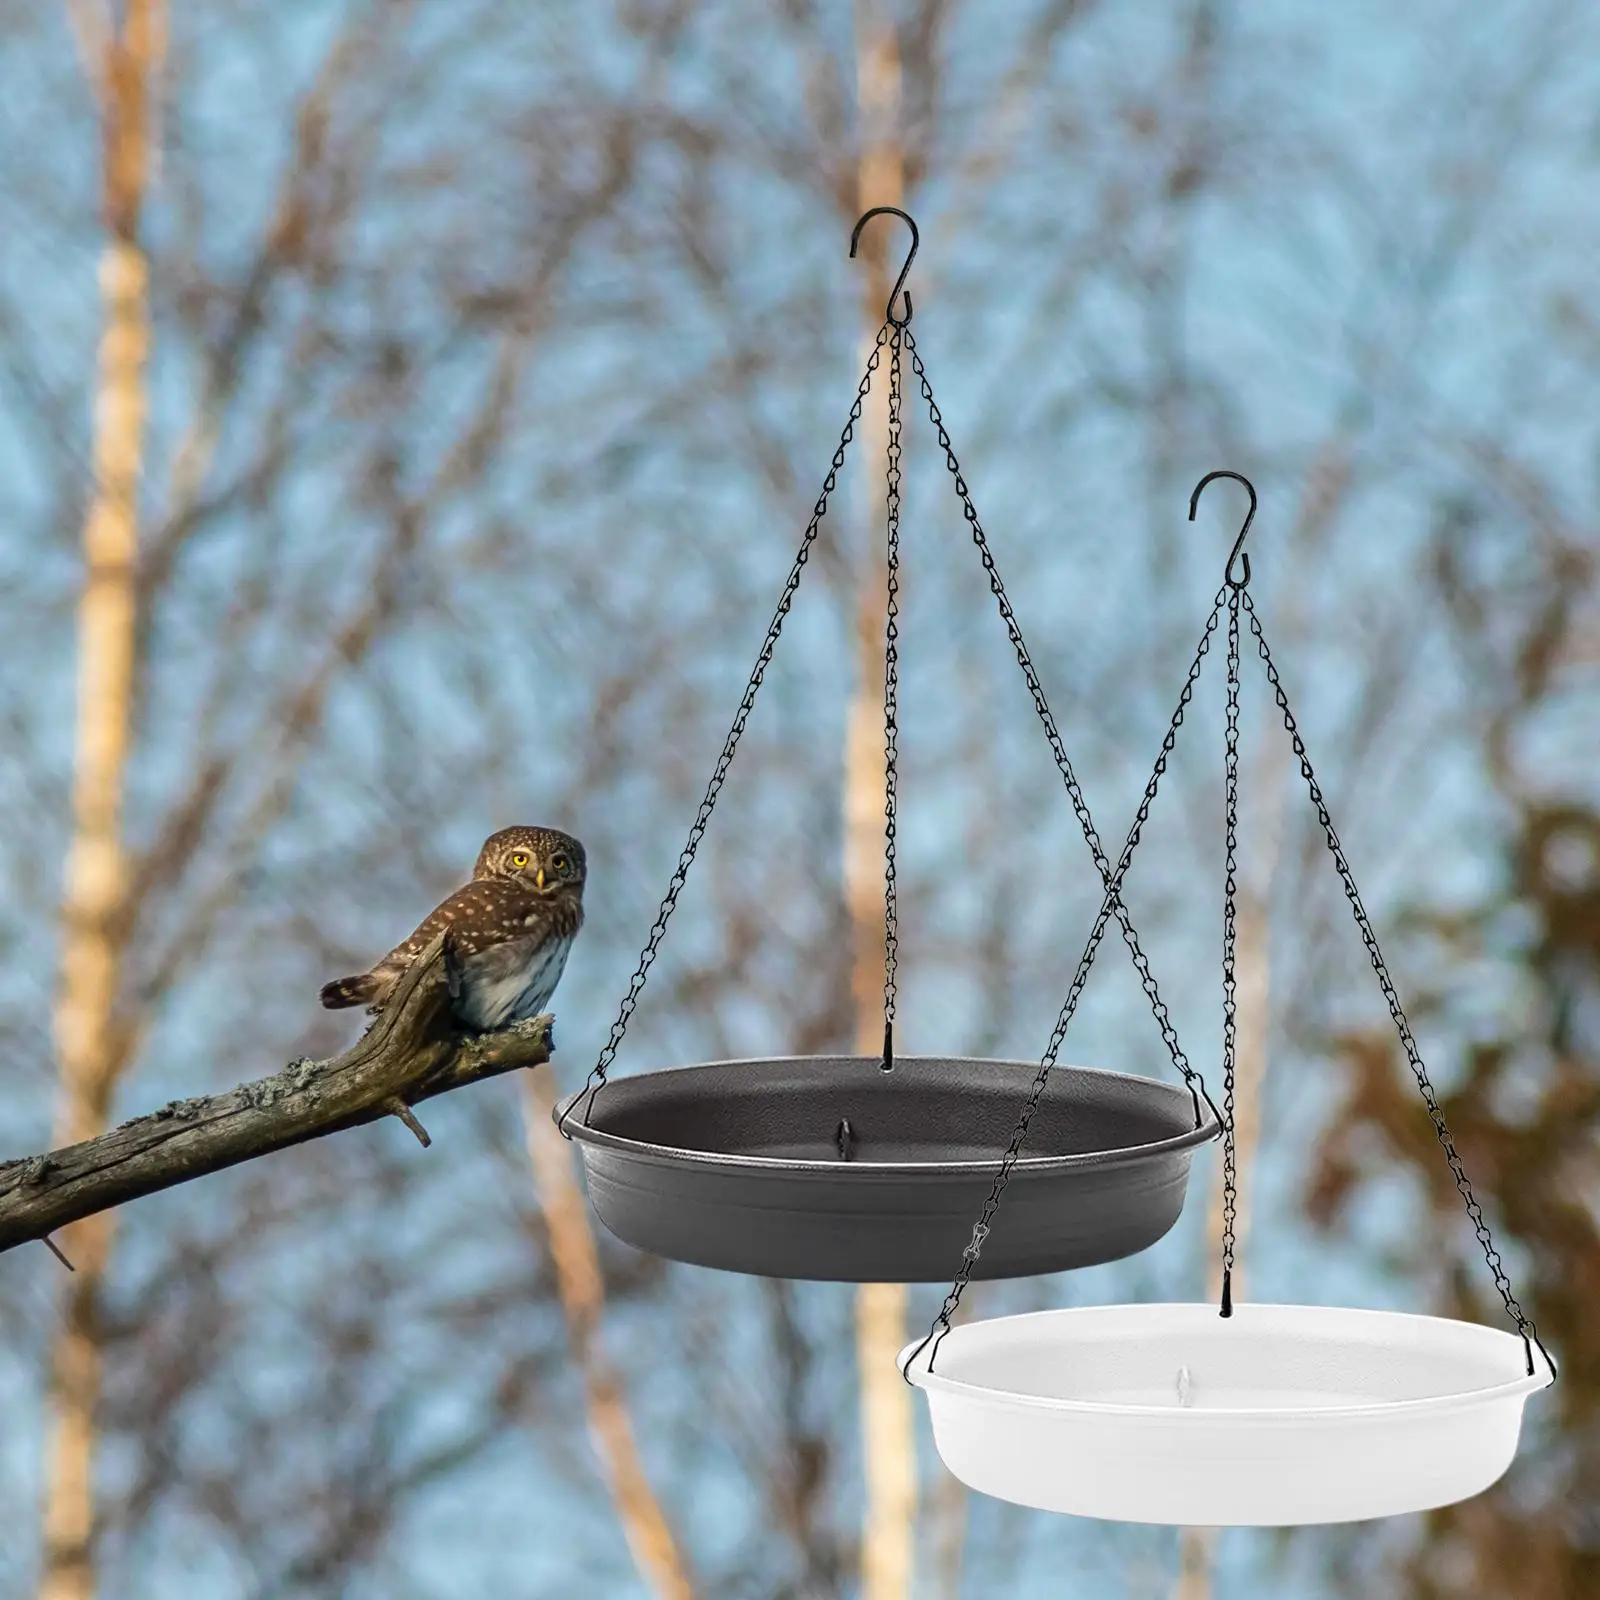 Hanging Bird Feeder Tray Metal Mesh Platform, Strong Chains, Seed Tray, for Outdoors Wild Backyard Attracting Birds Porch Patio